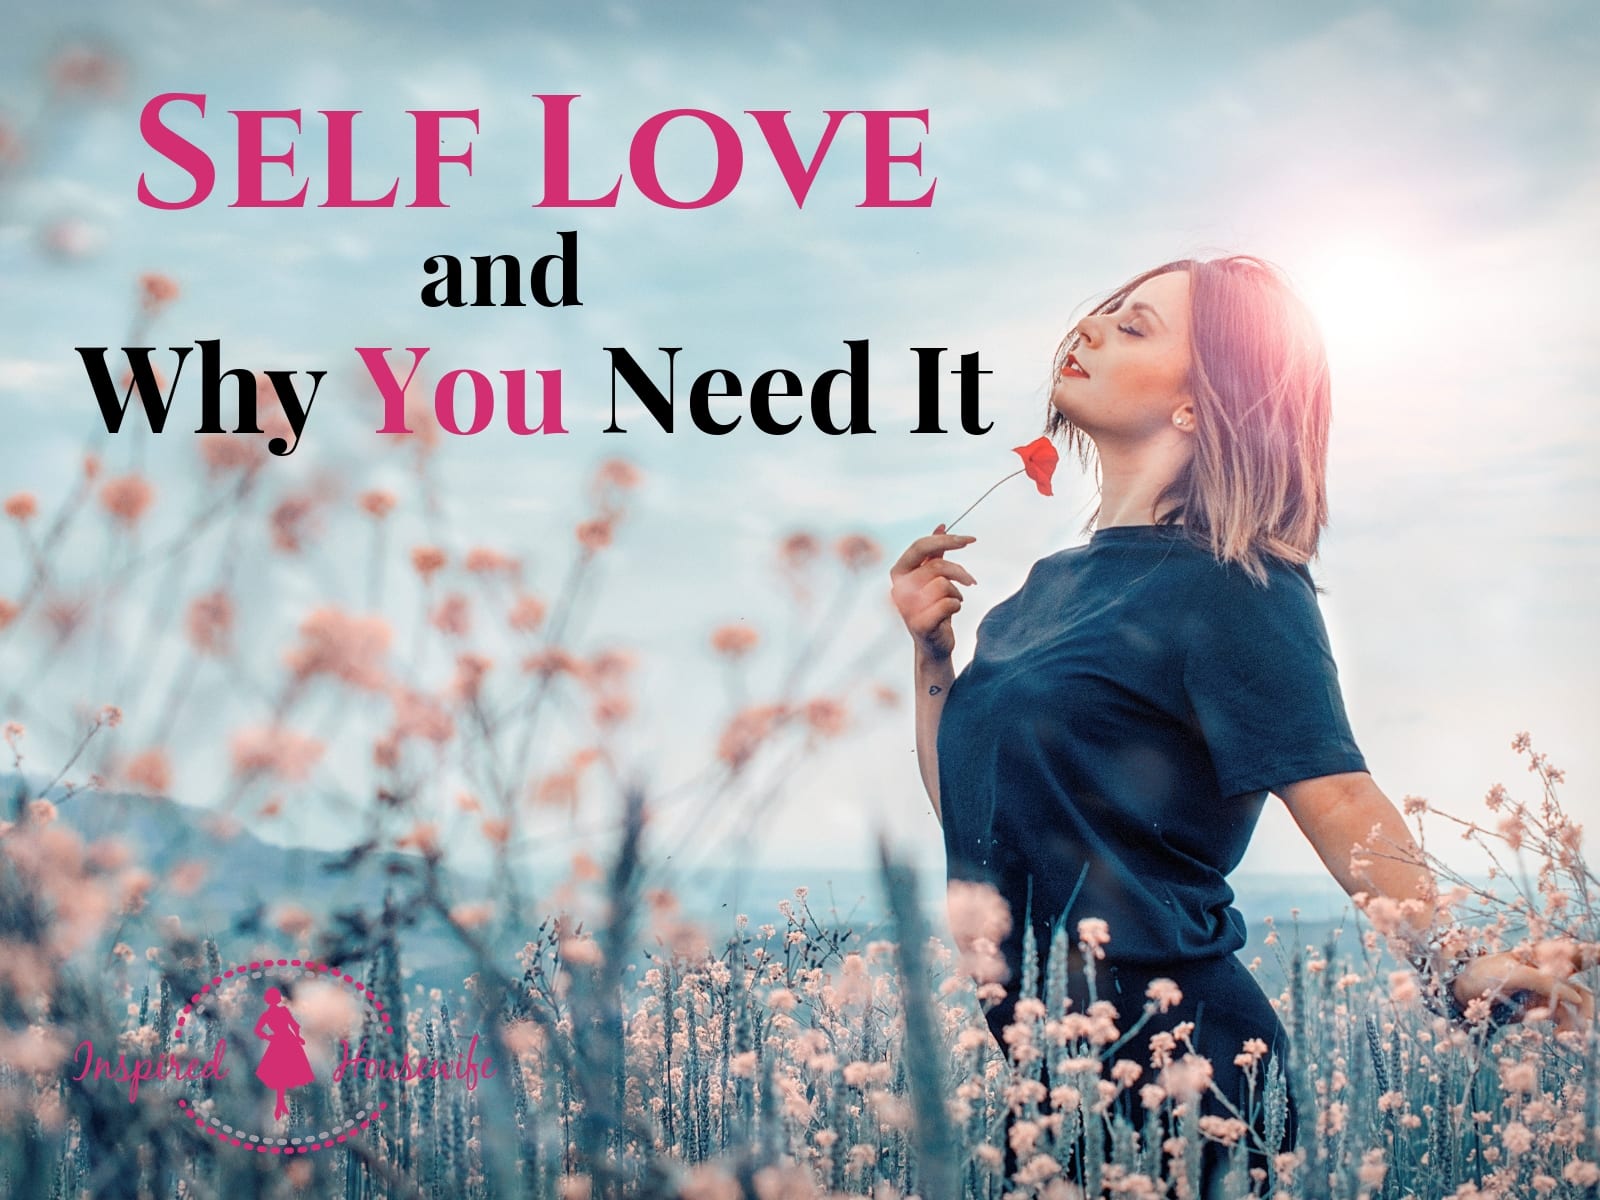 Self Love and Why You Need It